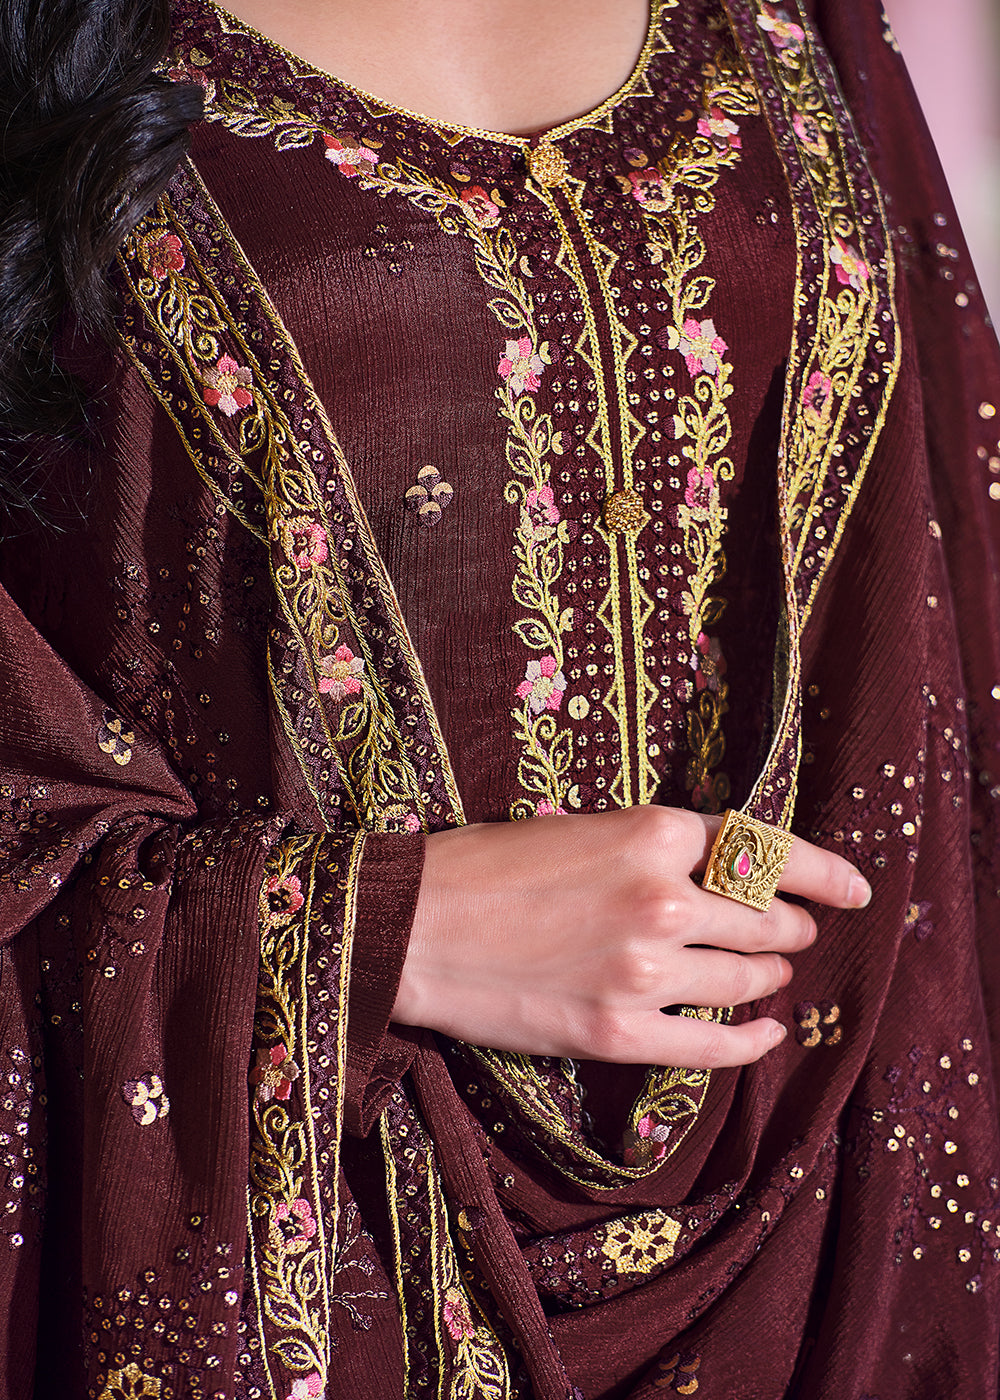 Buy Now Brownish Maroon Pakistani Pant Style Chinon Salwar Suit Online in USA, UK, Canada, Germany & Worldwide at Empress Clothing.